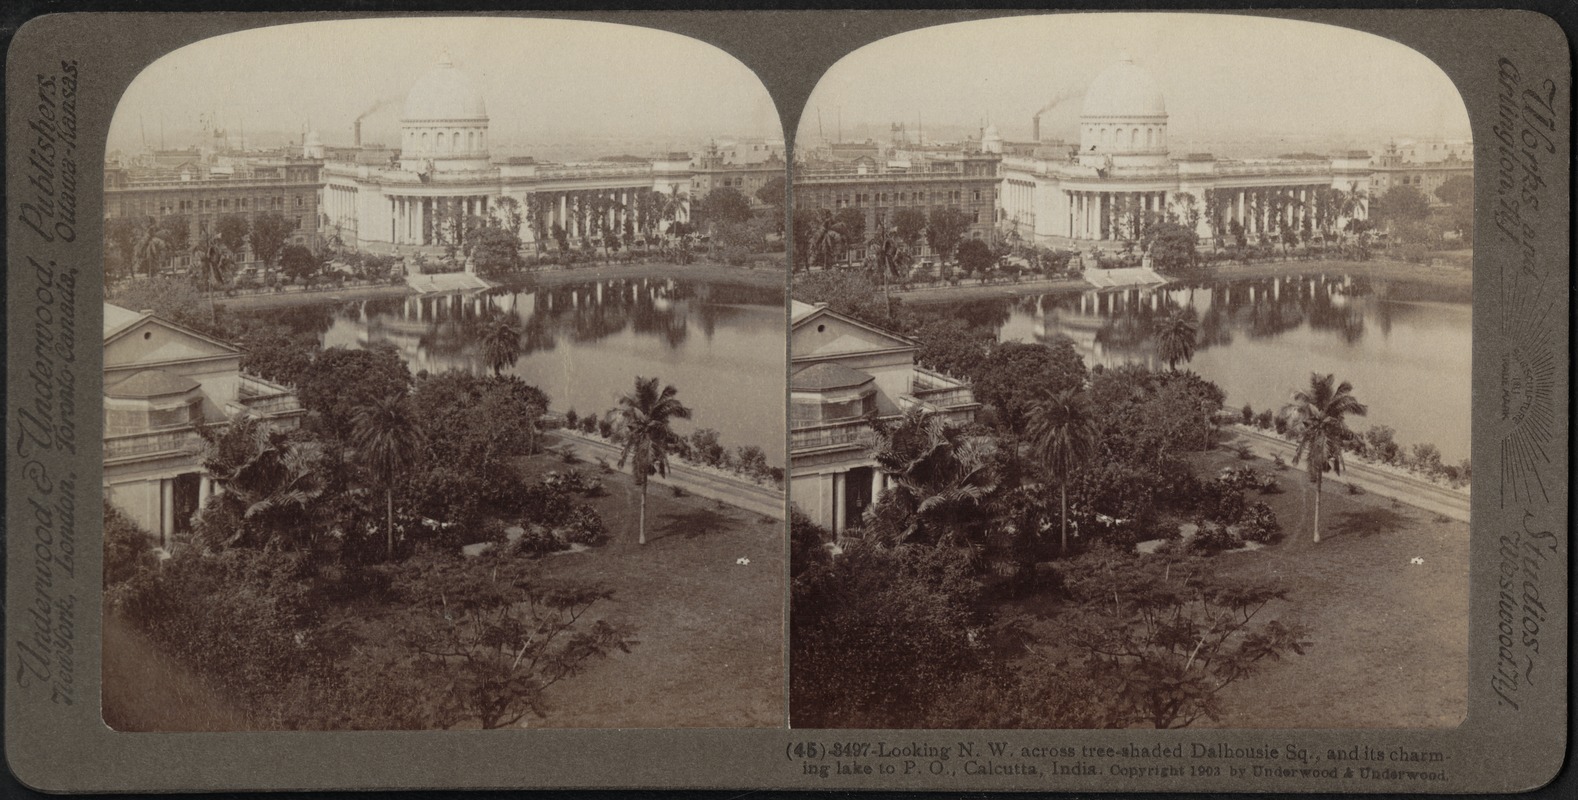 Looking across Dalhousie Square to post office, Calcutta, India